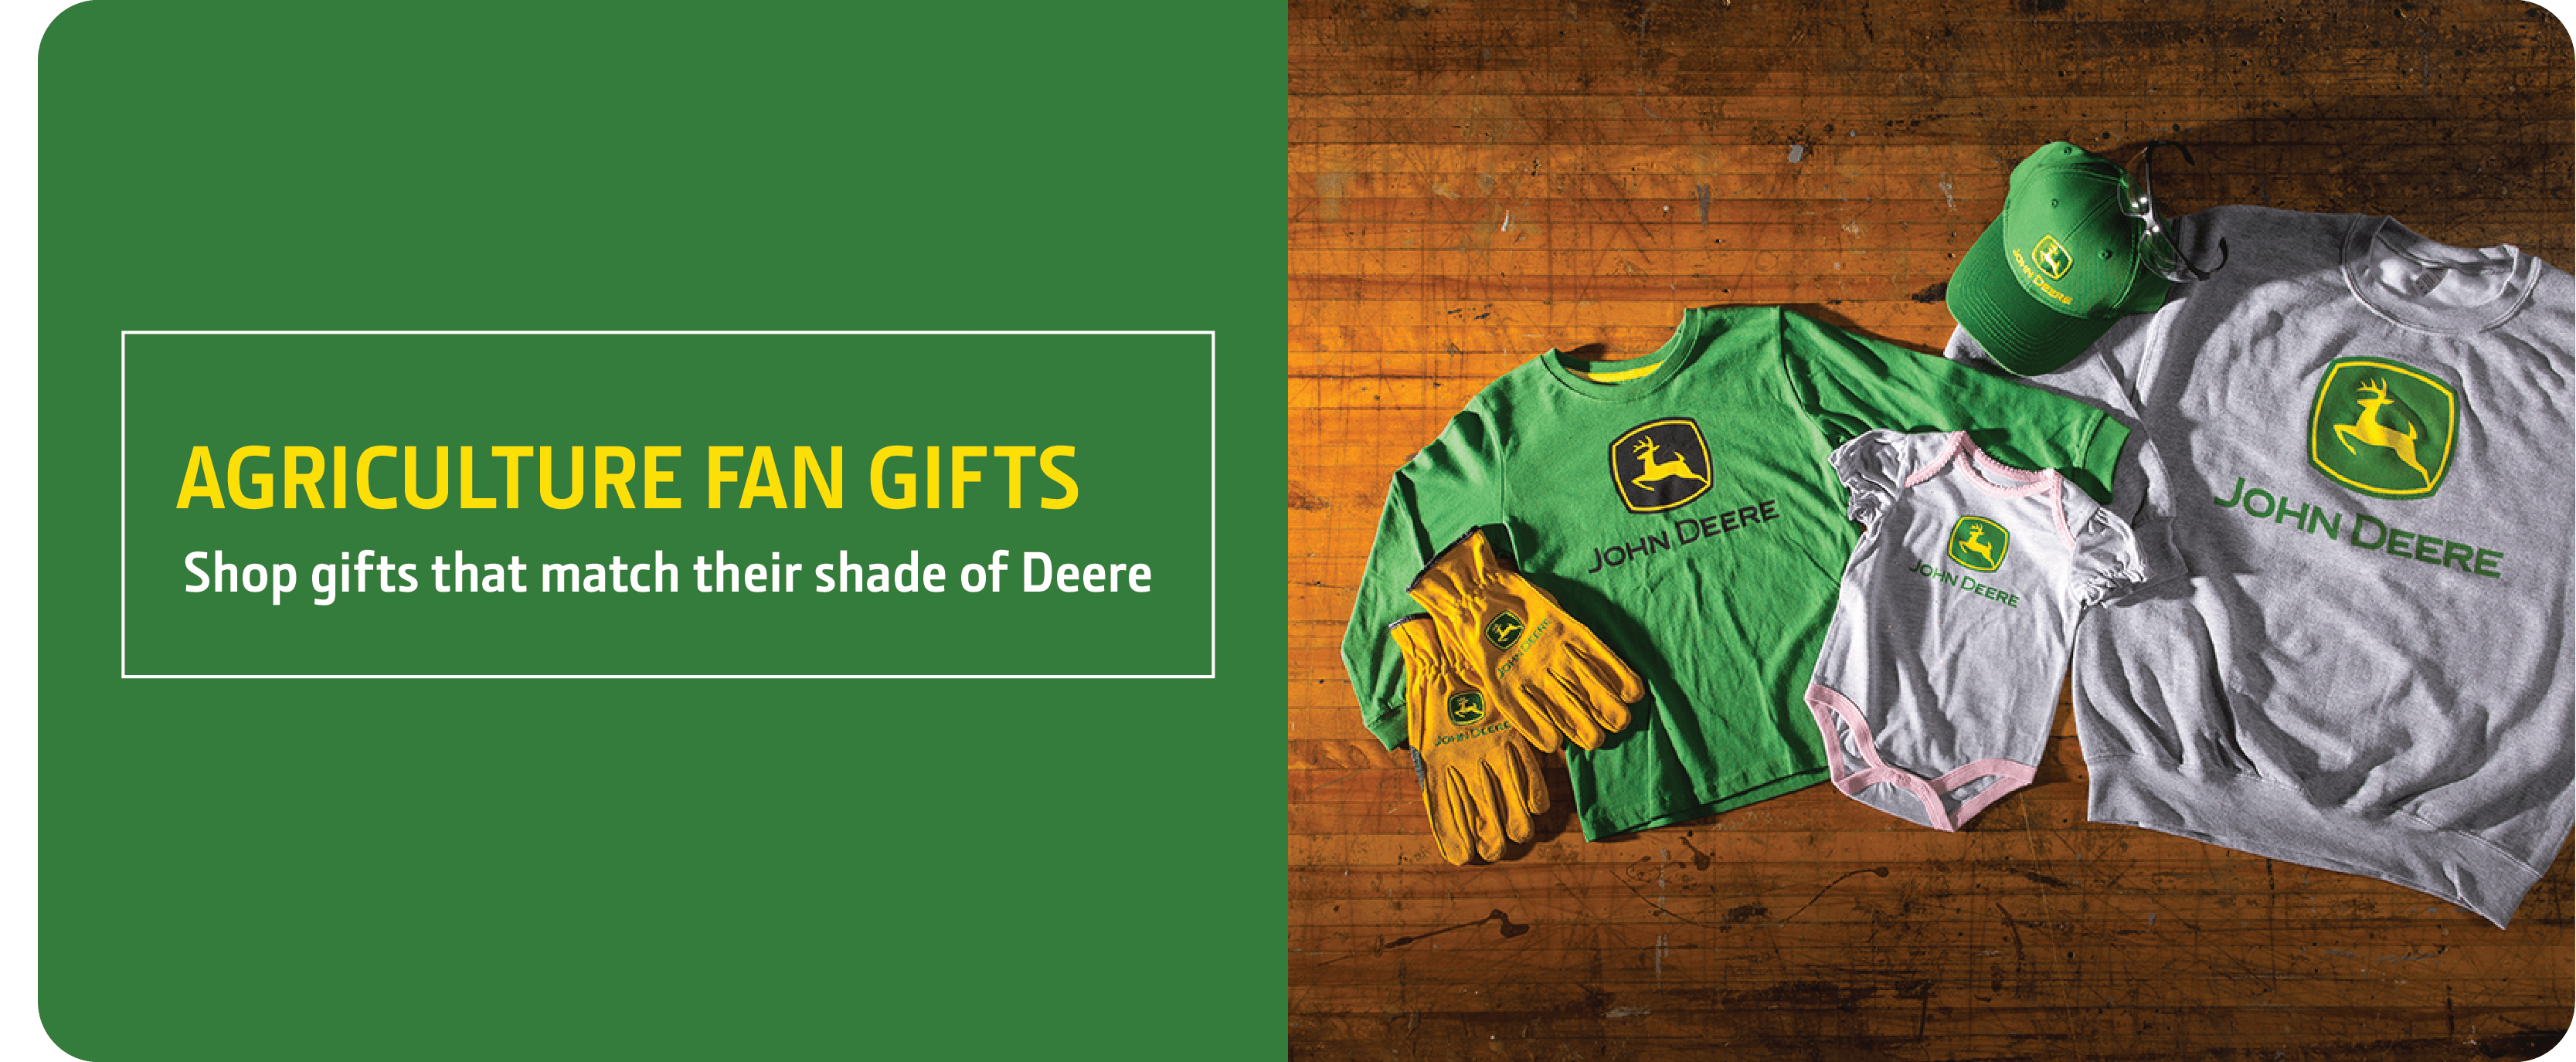 John Deere Agriculture Apparel, Gifts, and Toys